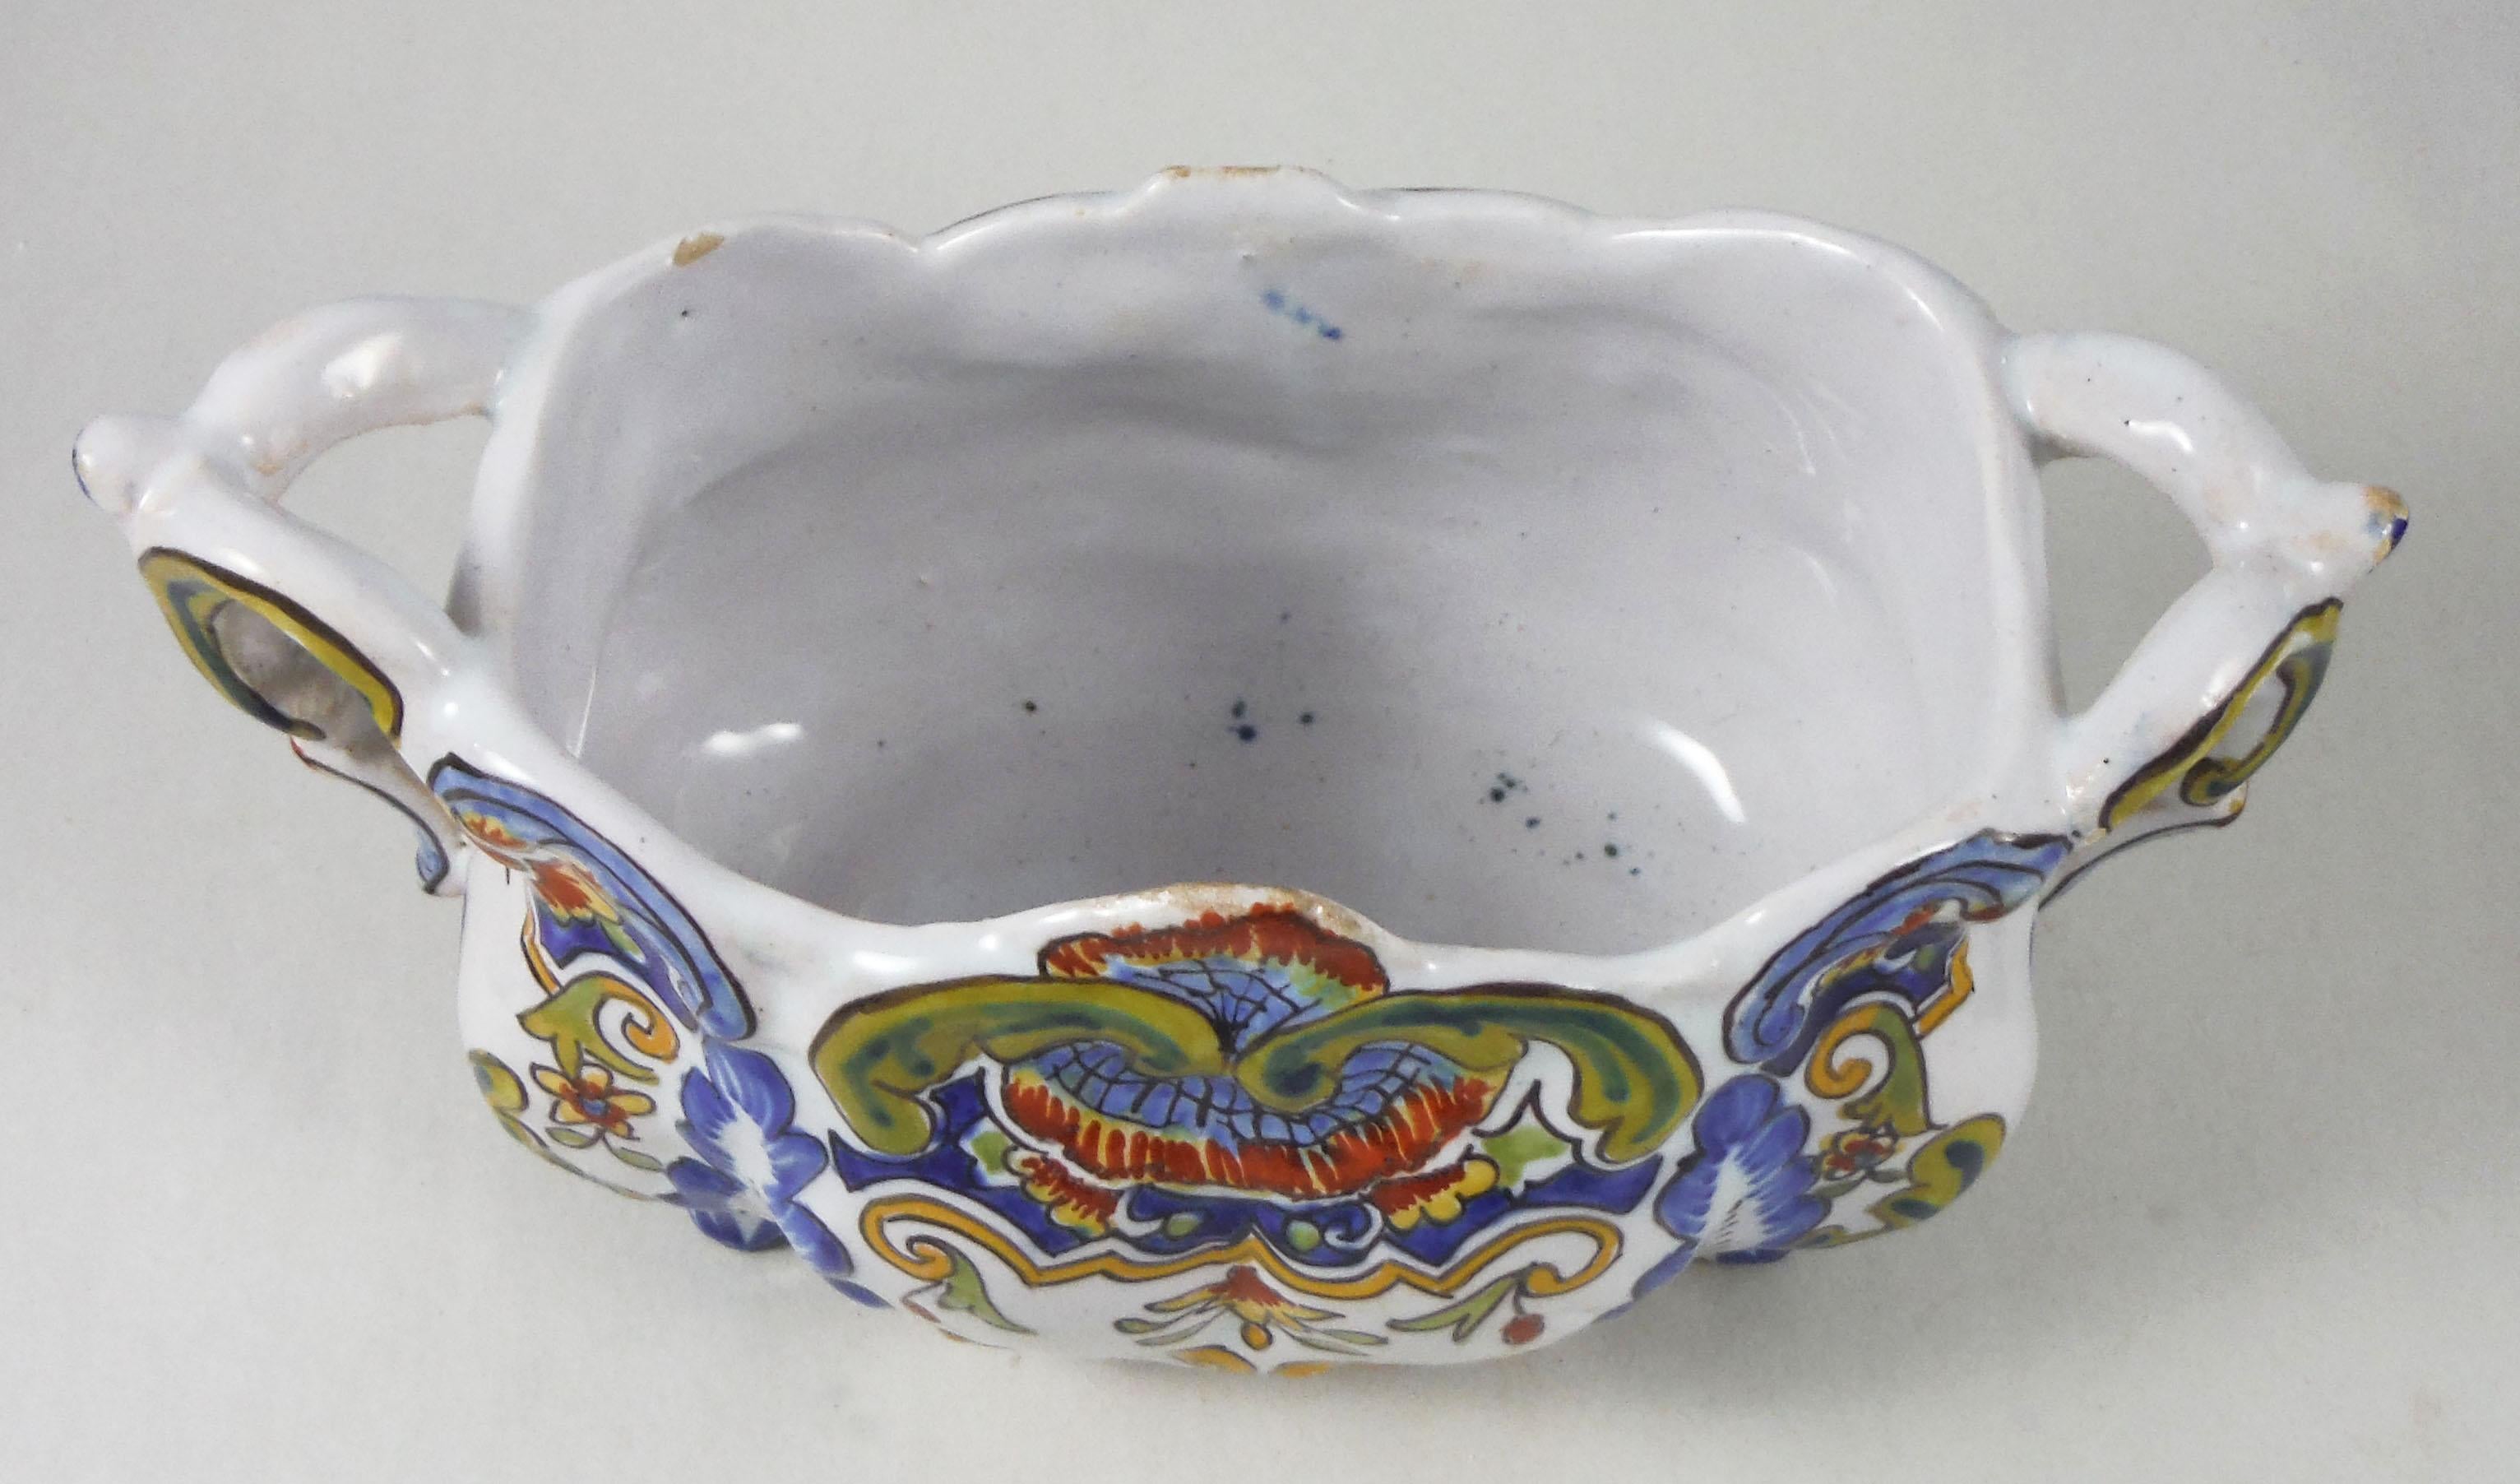 French Desvres faience jardinière painted with flowers, circa 1900. Marked on base.
Minor wear.